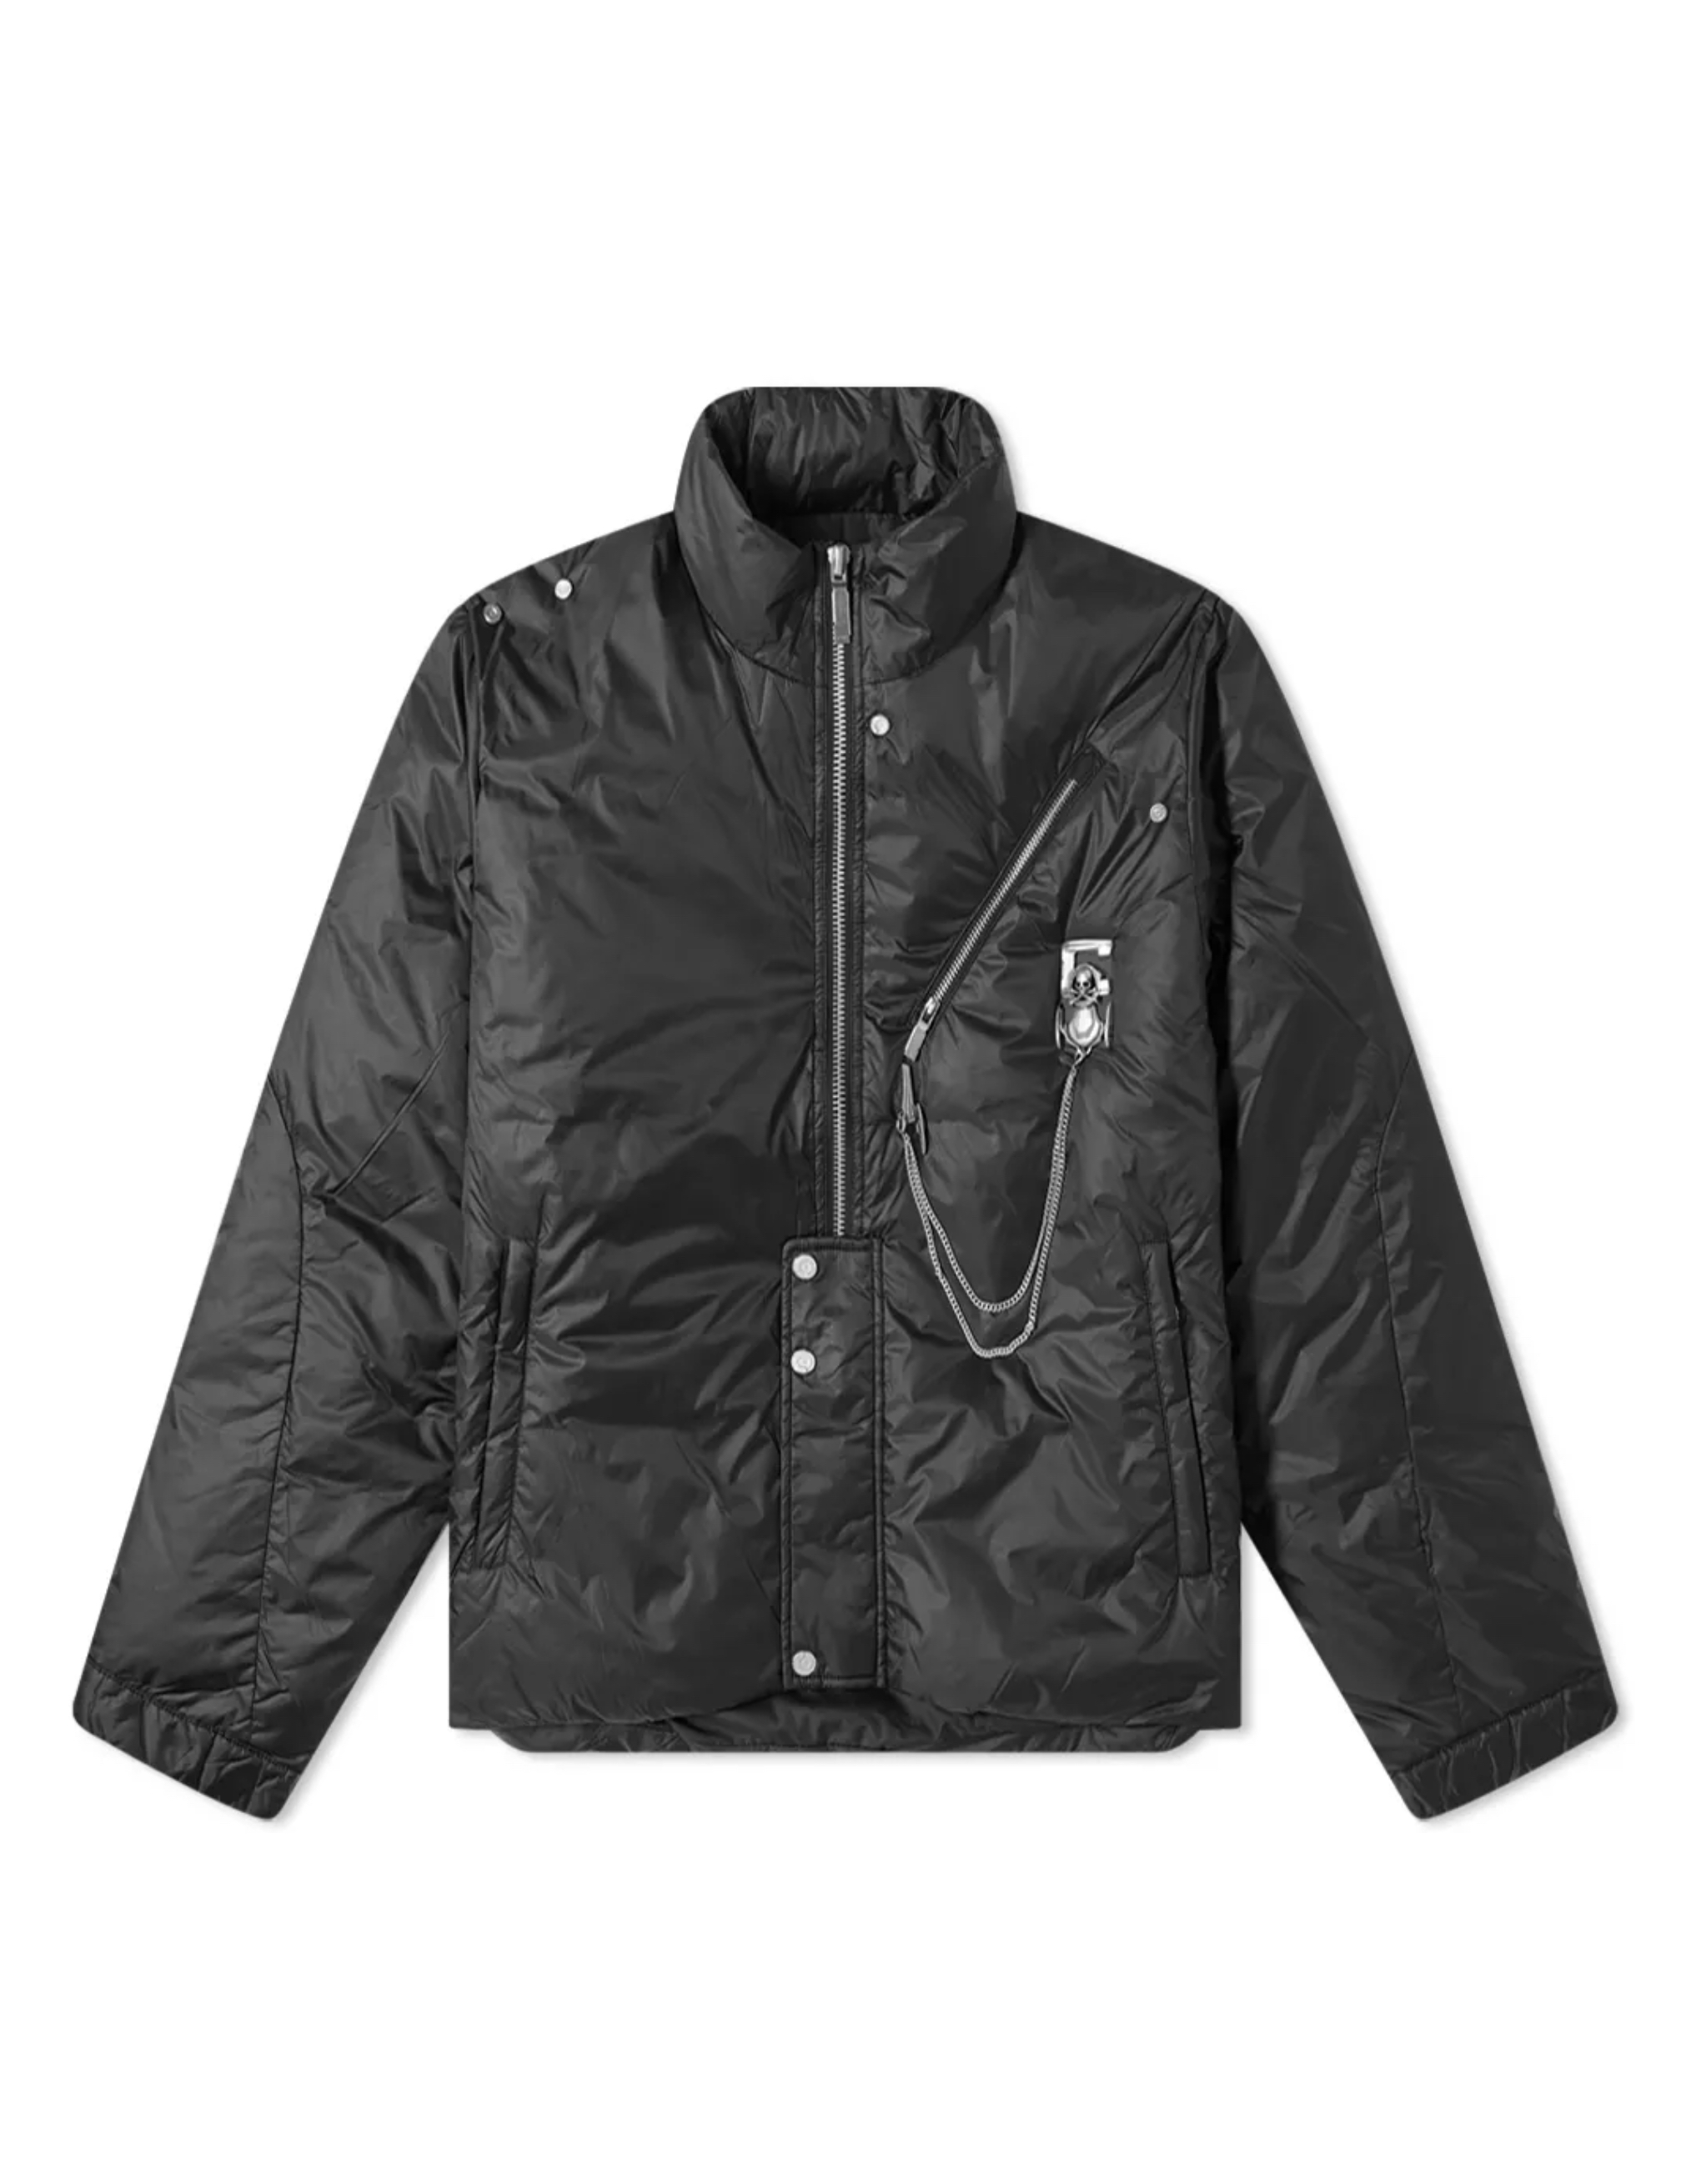 Mastermind X C2h4 Down Embroidered Jacket In Black